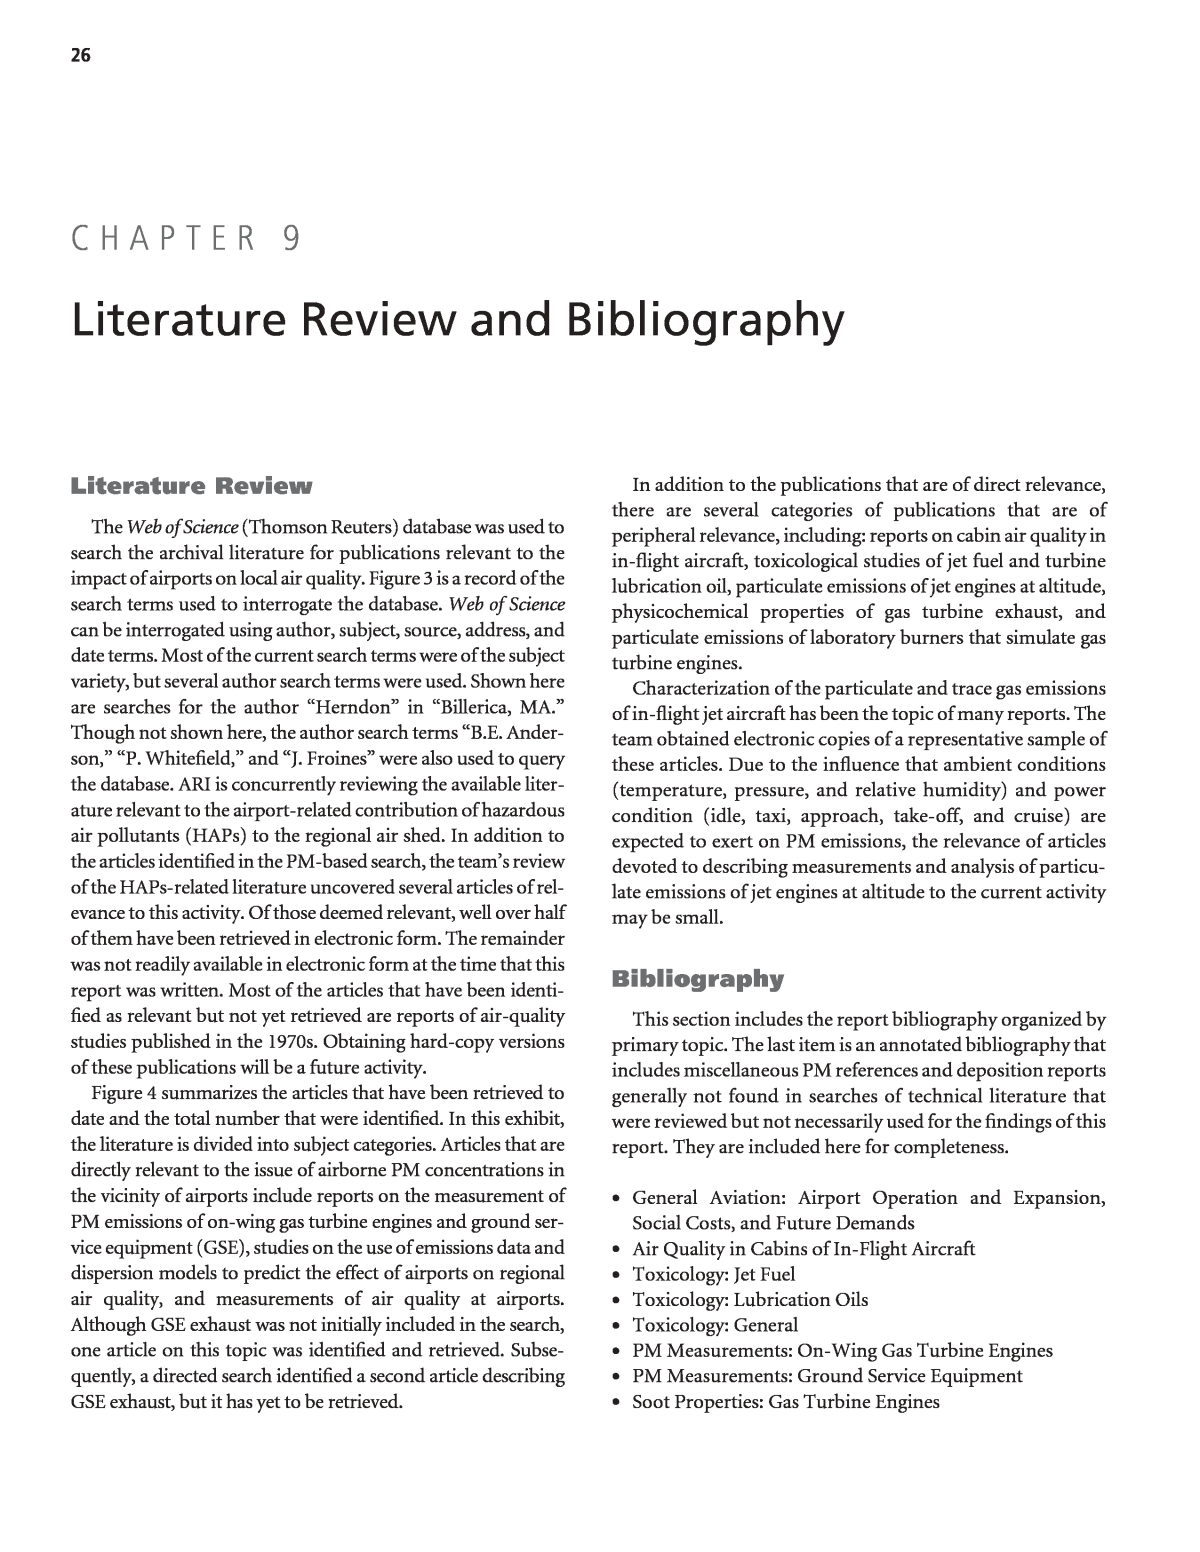 literature review on bibliography